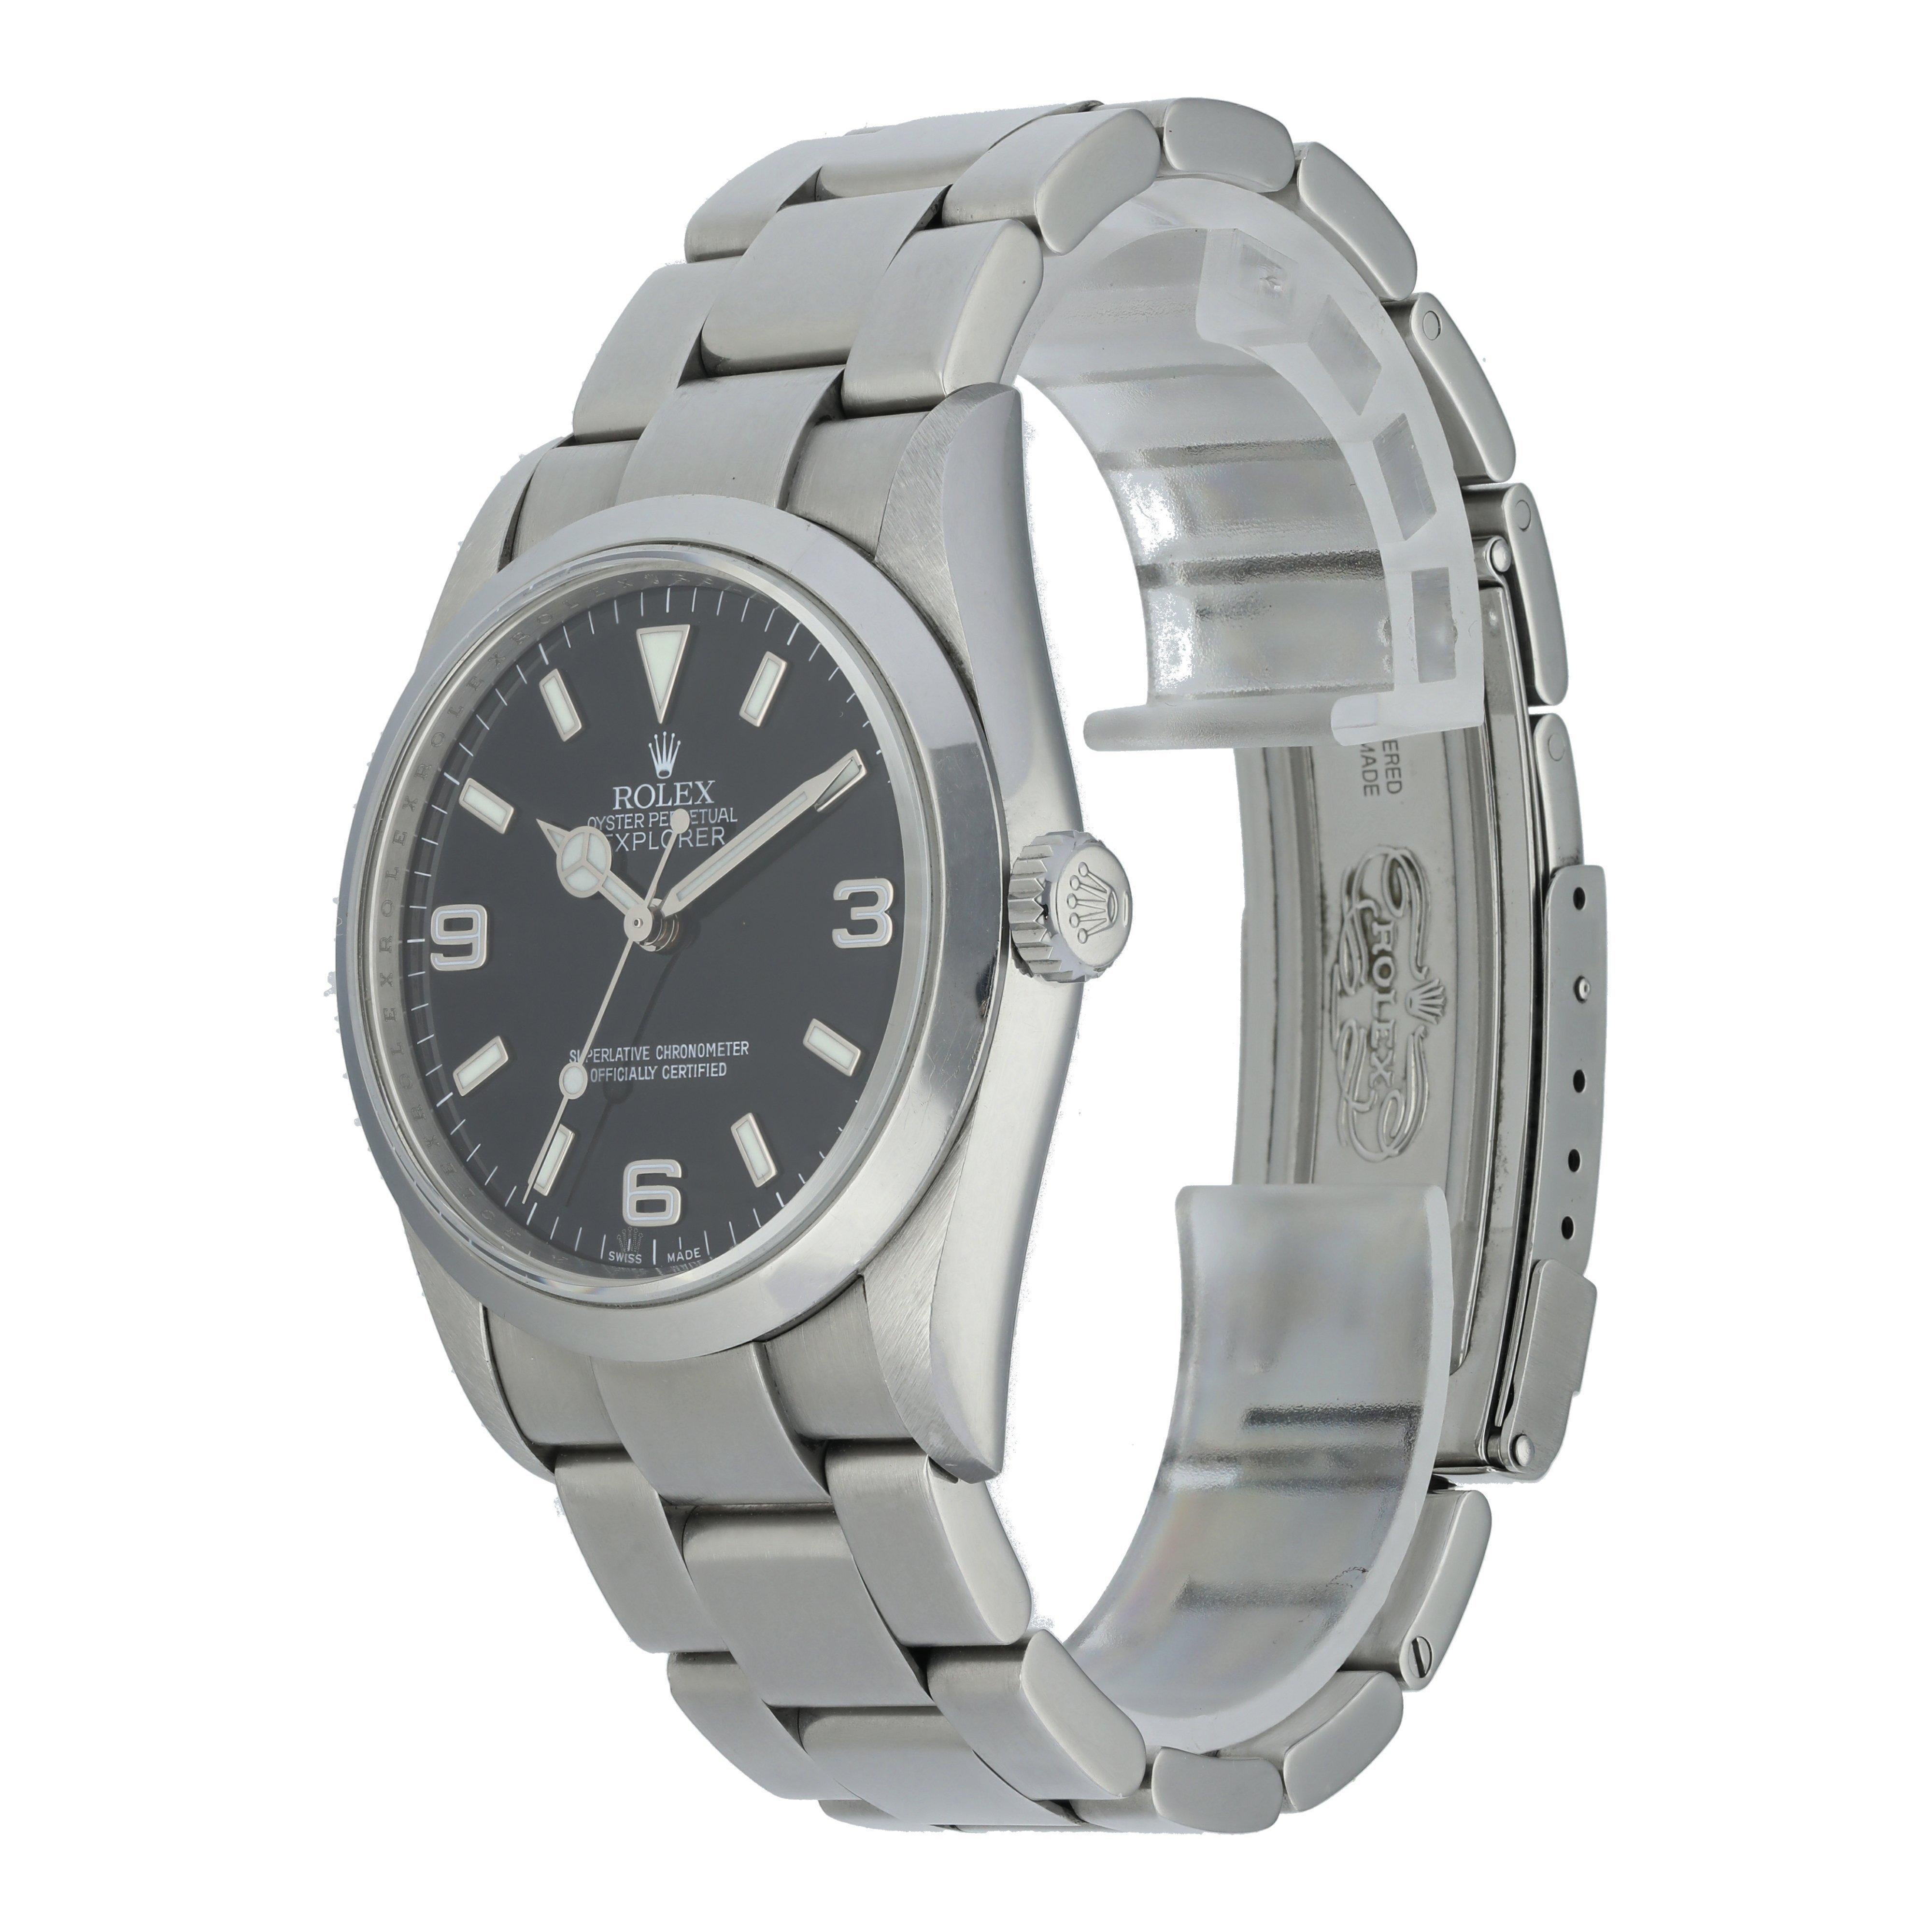 Rolex Explorer 114270 Men's Watch.
36mm Stainless Steel case. 
Stainless Steel smooth bezel. 
Black dial with engraved rehaut. 
Minute markers on the outer dial. 
Stainless Steel Bracelet with Oyster-clasp. 
Will fit up to a 7-inch wrist. 
Sapphire